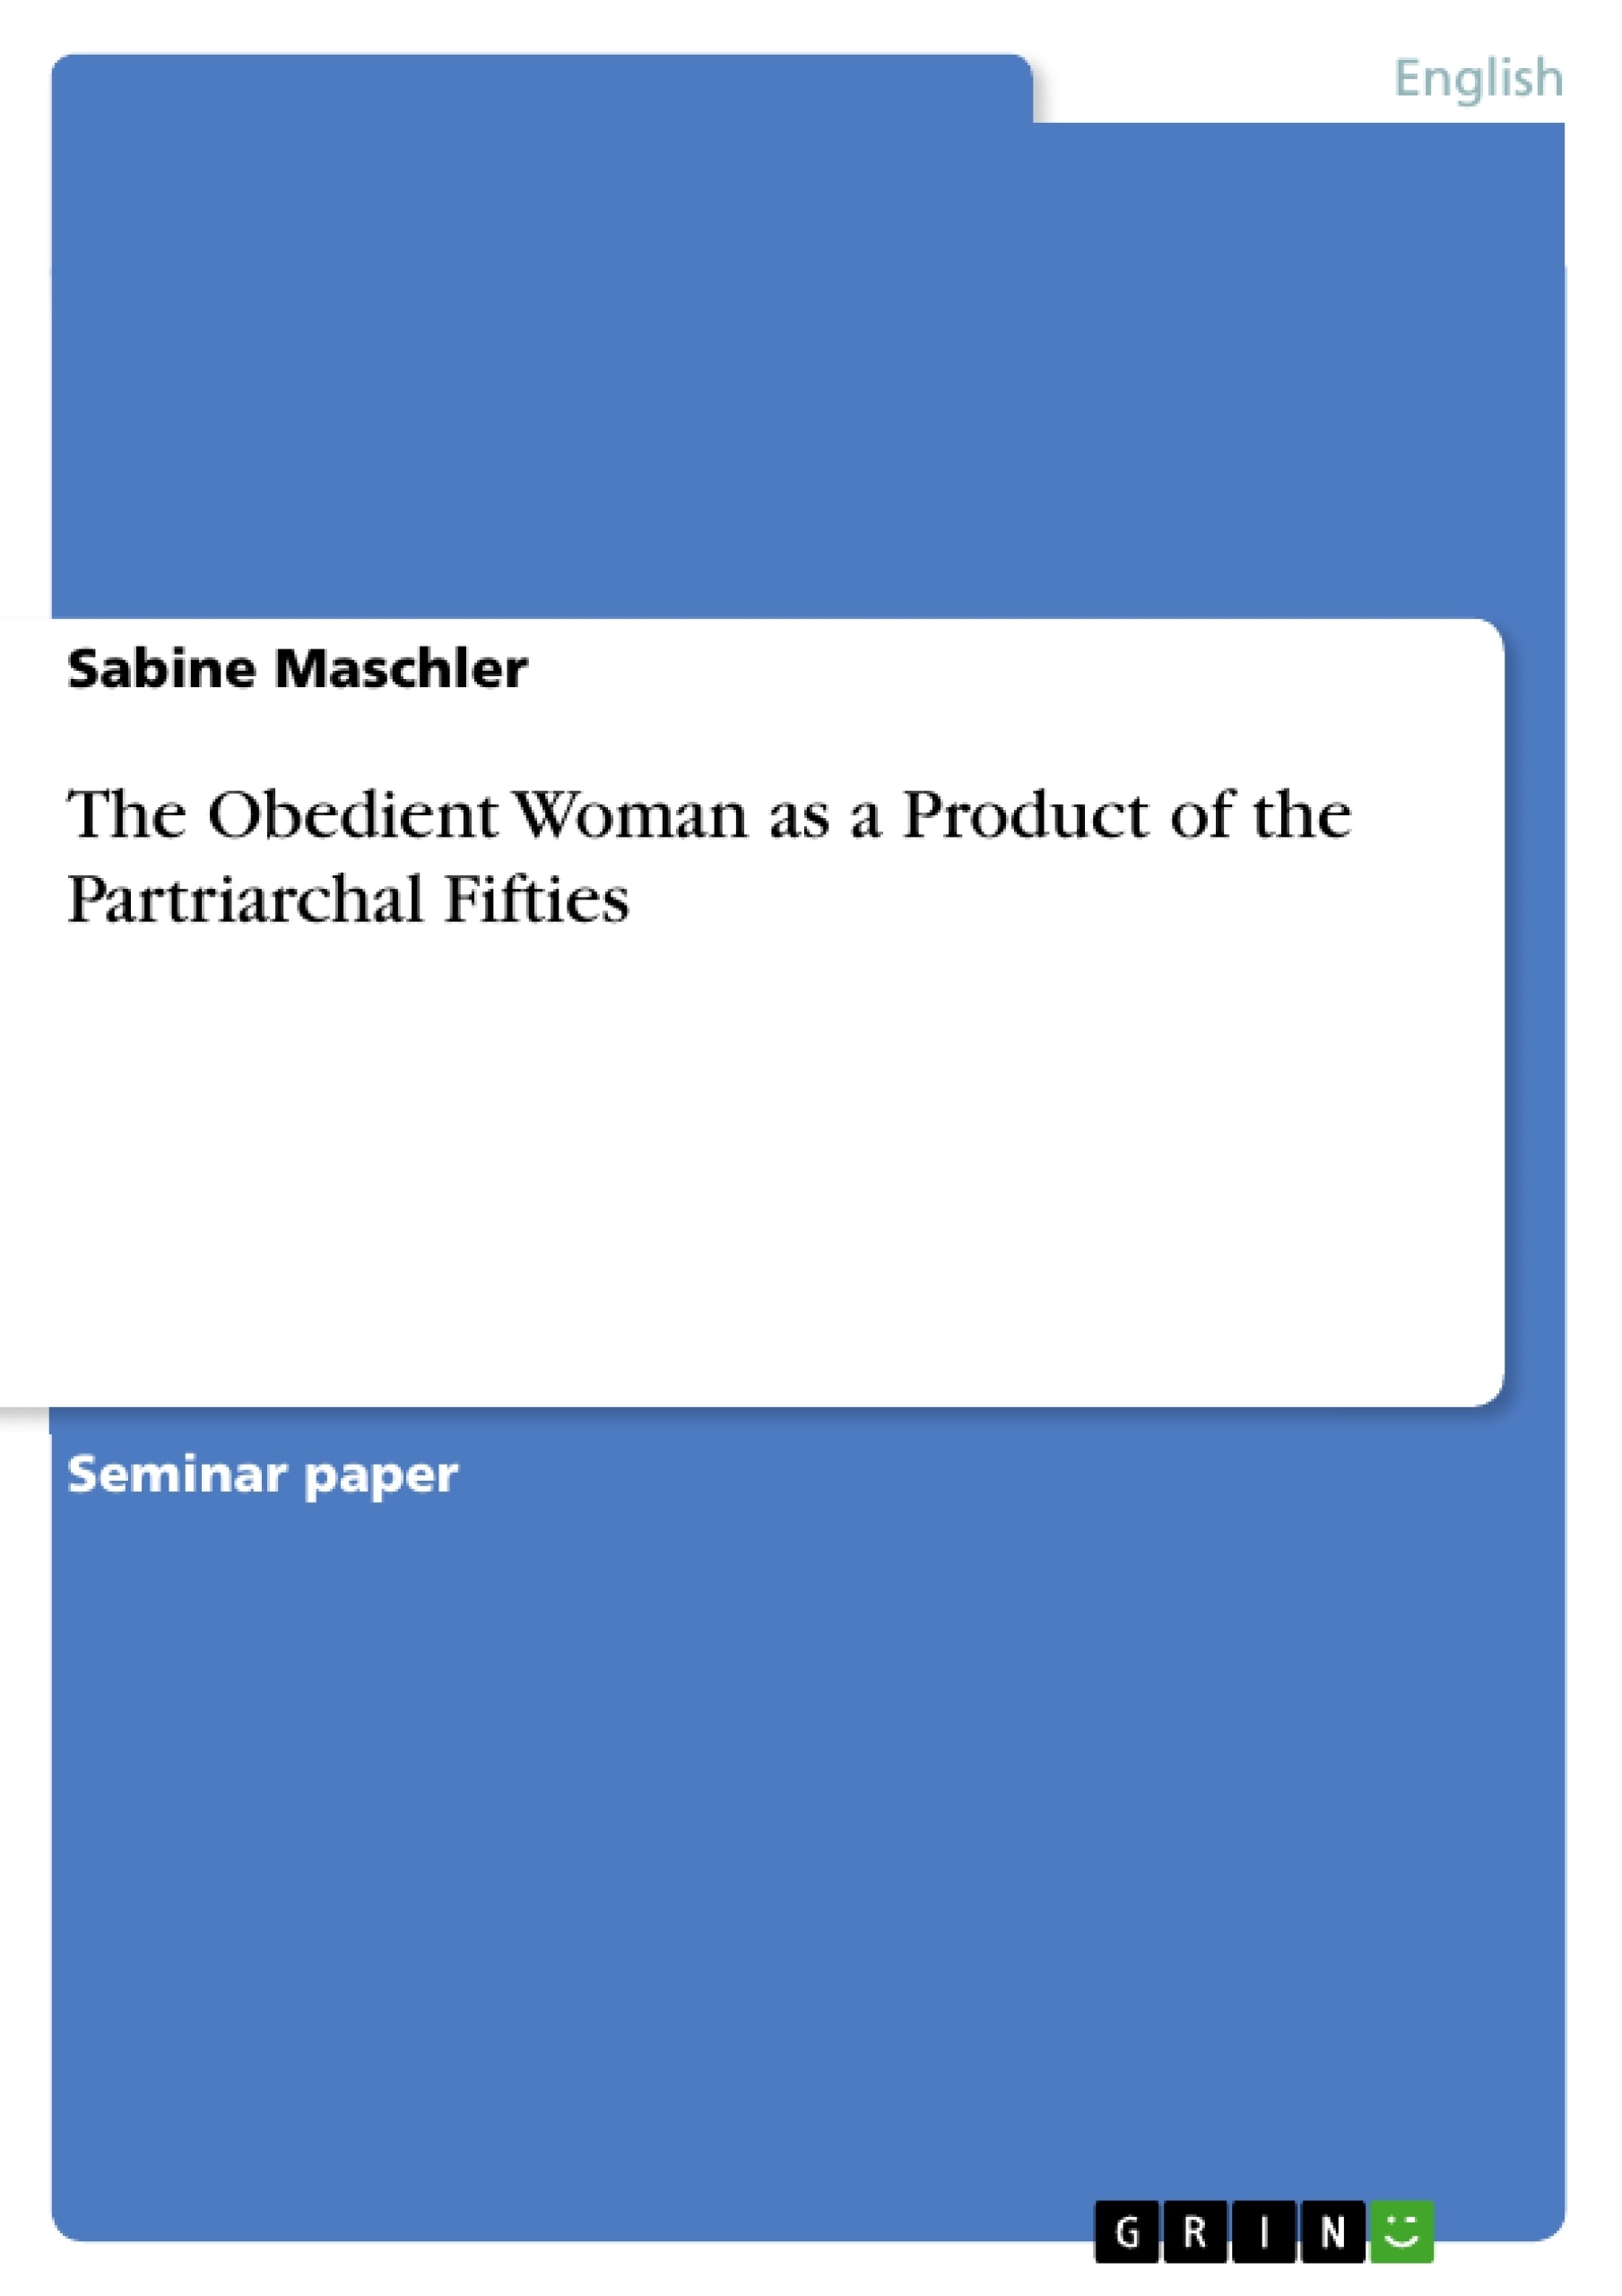 Titel: The Obedient Woman as a Product of the Partriarchal Fifties